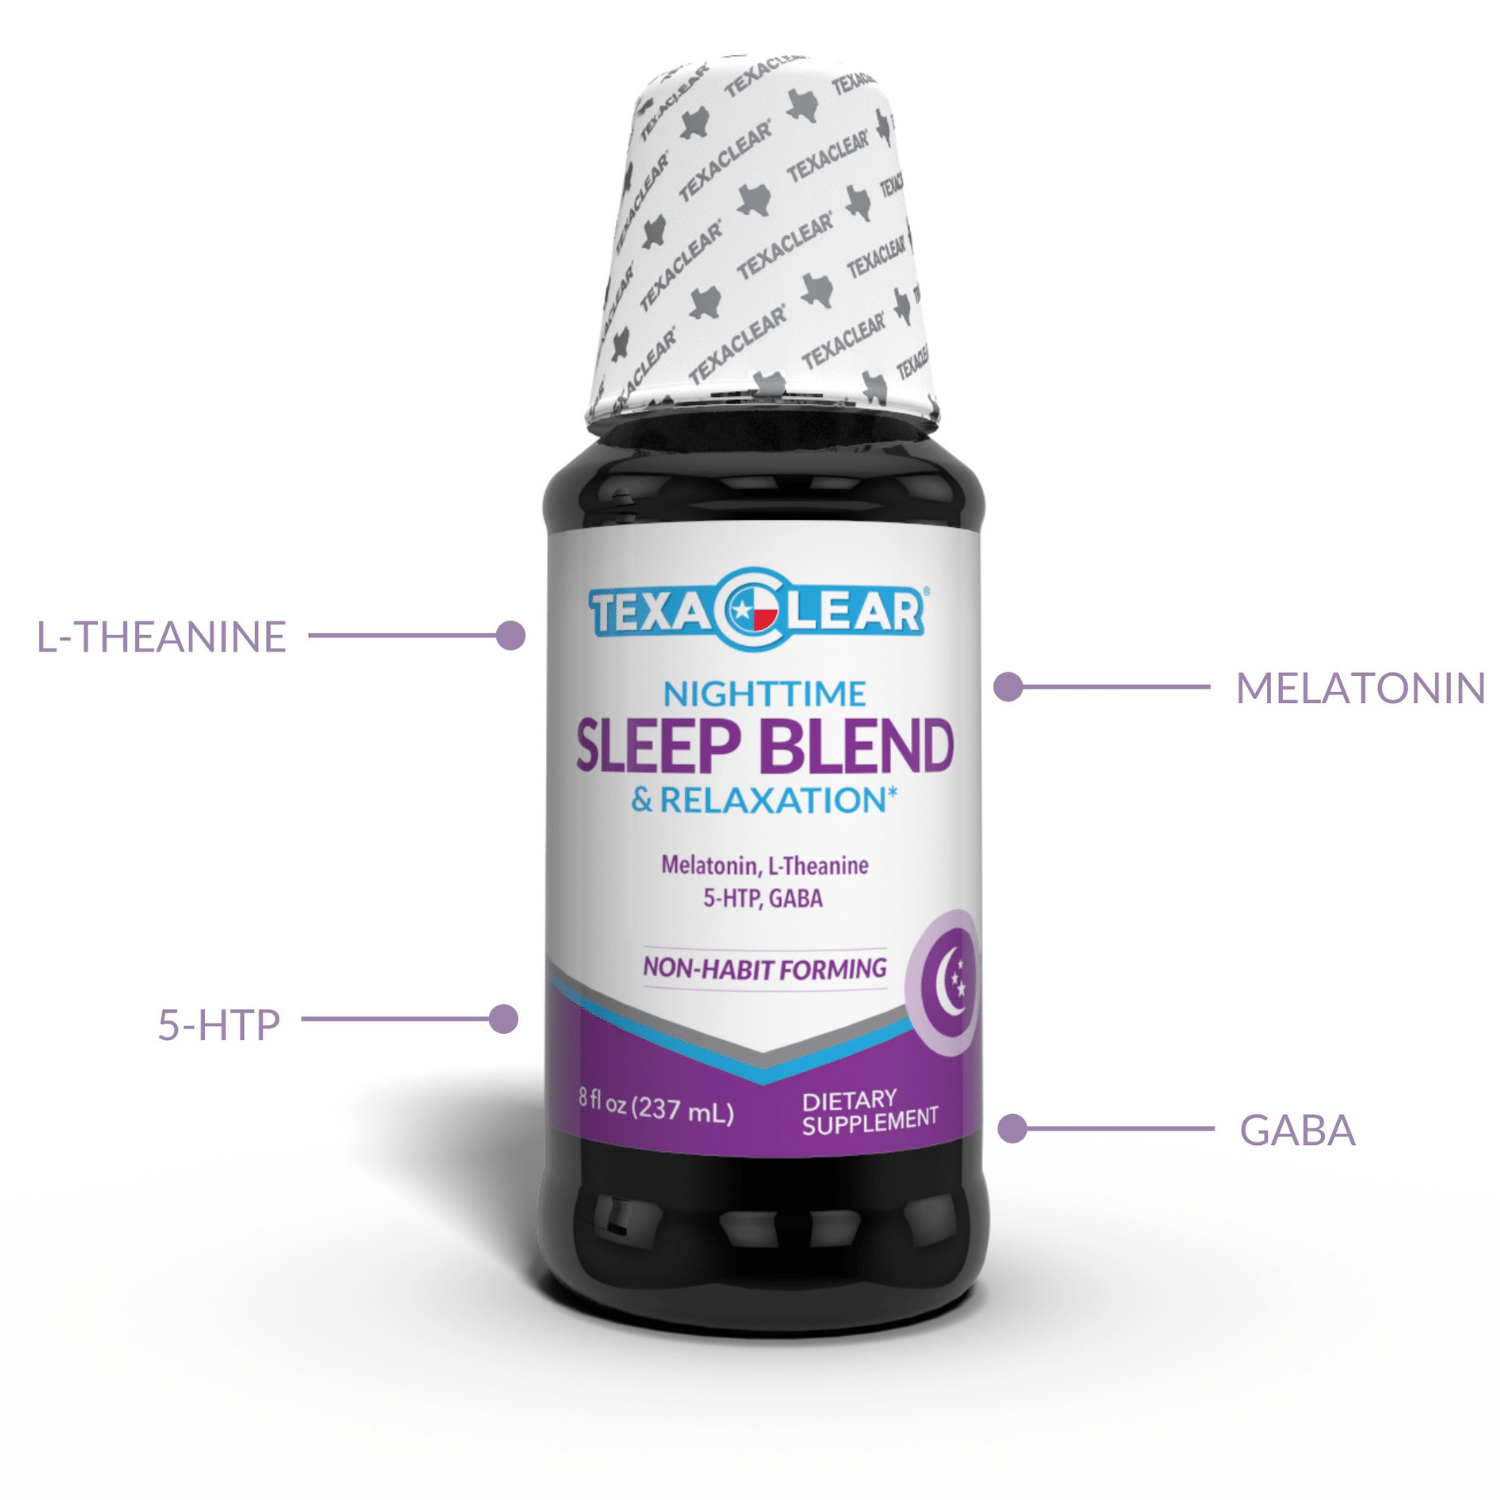 Non-habit forming sleep formula made with Melatonin, 5-HTP, GABA, L-Theanine, and a soothing menthol flavor.